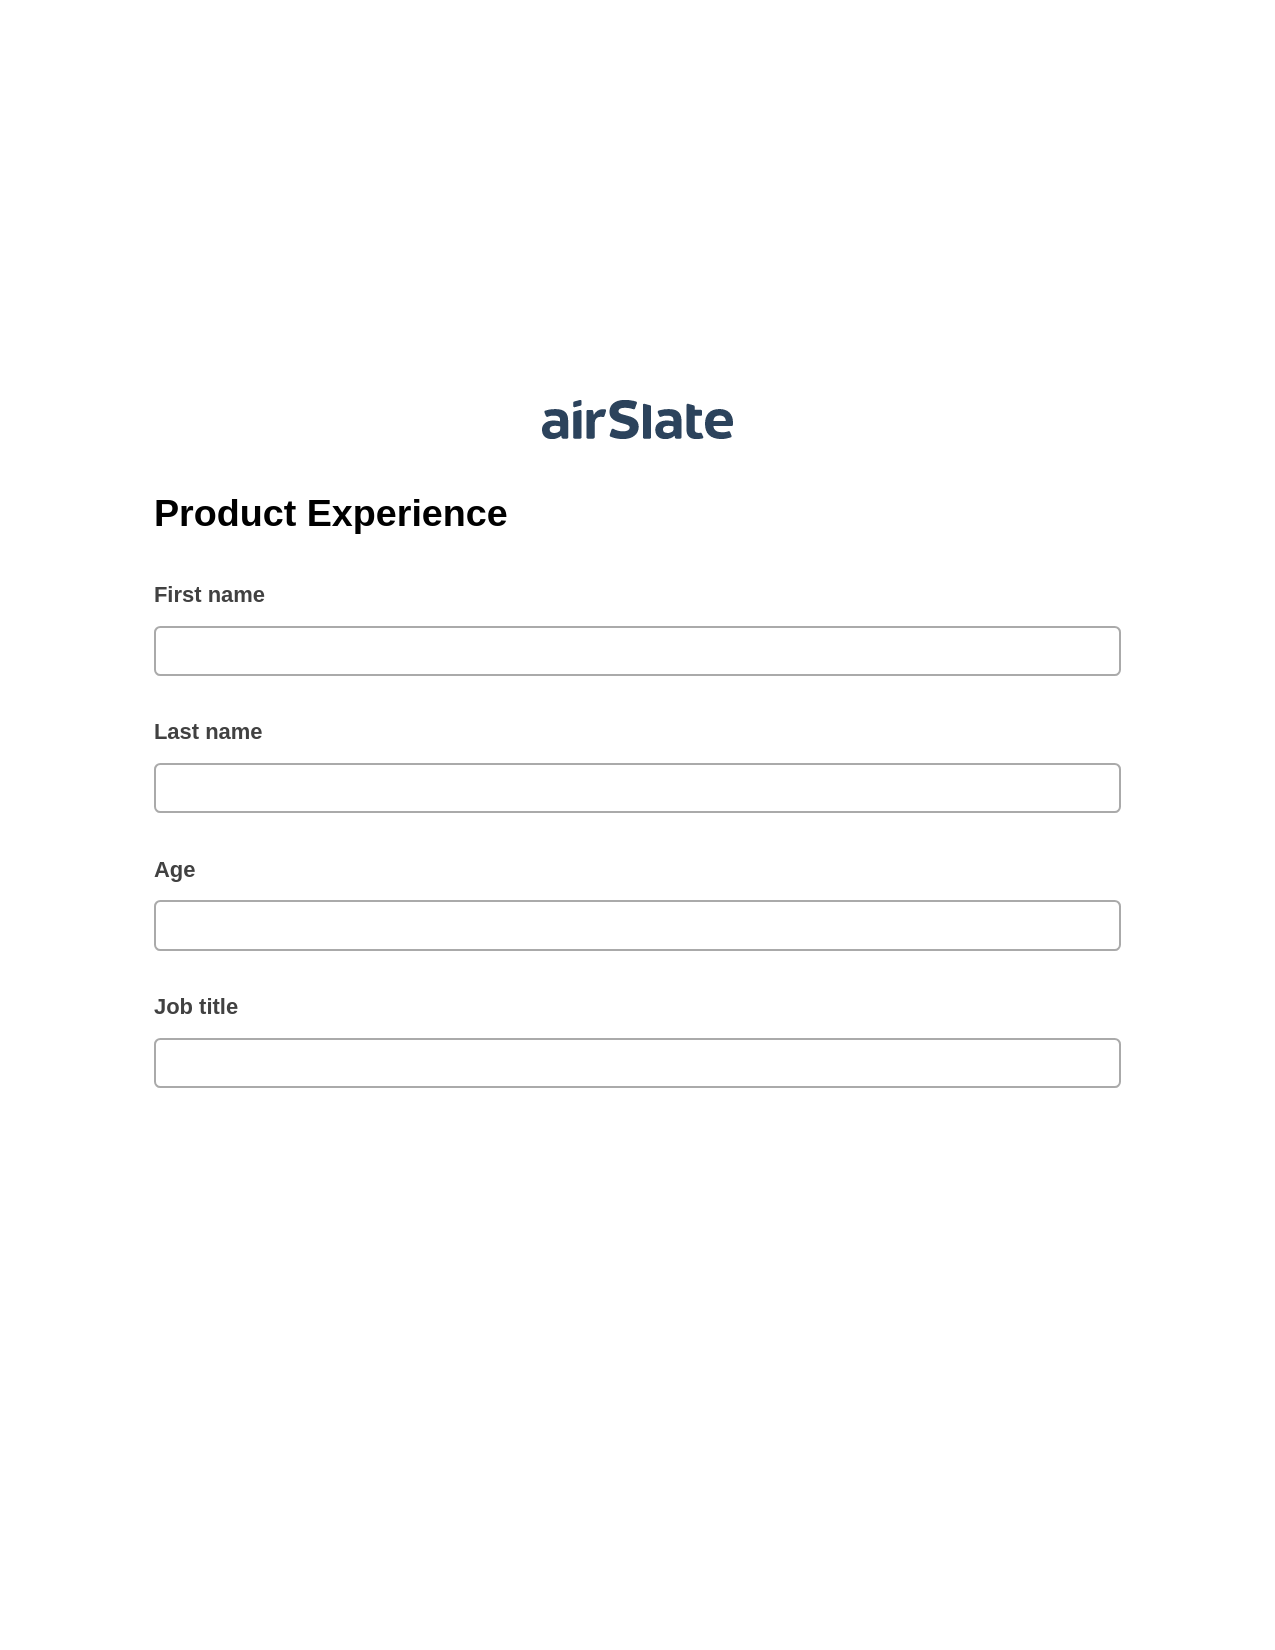 Product Experience Pre-fill Document Bot, Lock the Slate Bot, Archive to SharePoint Folder Bot